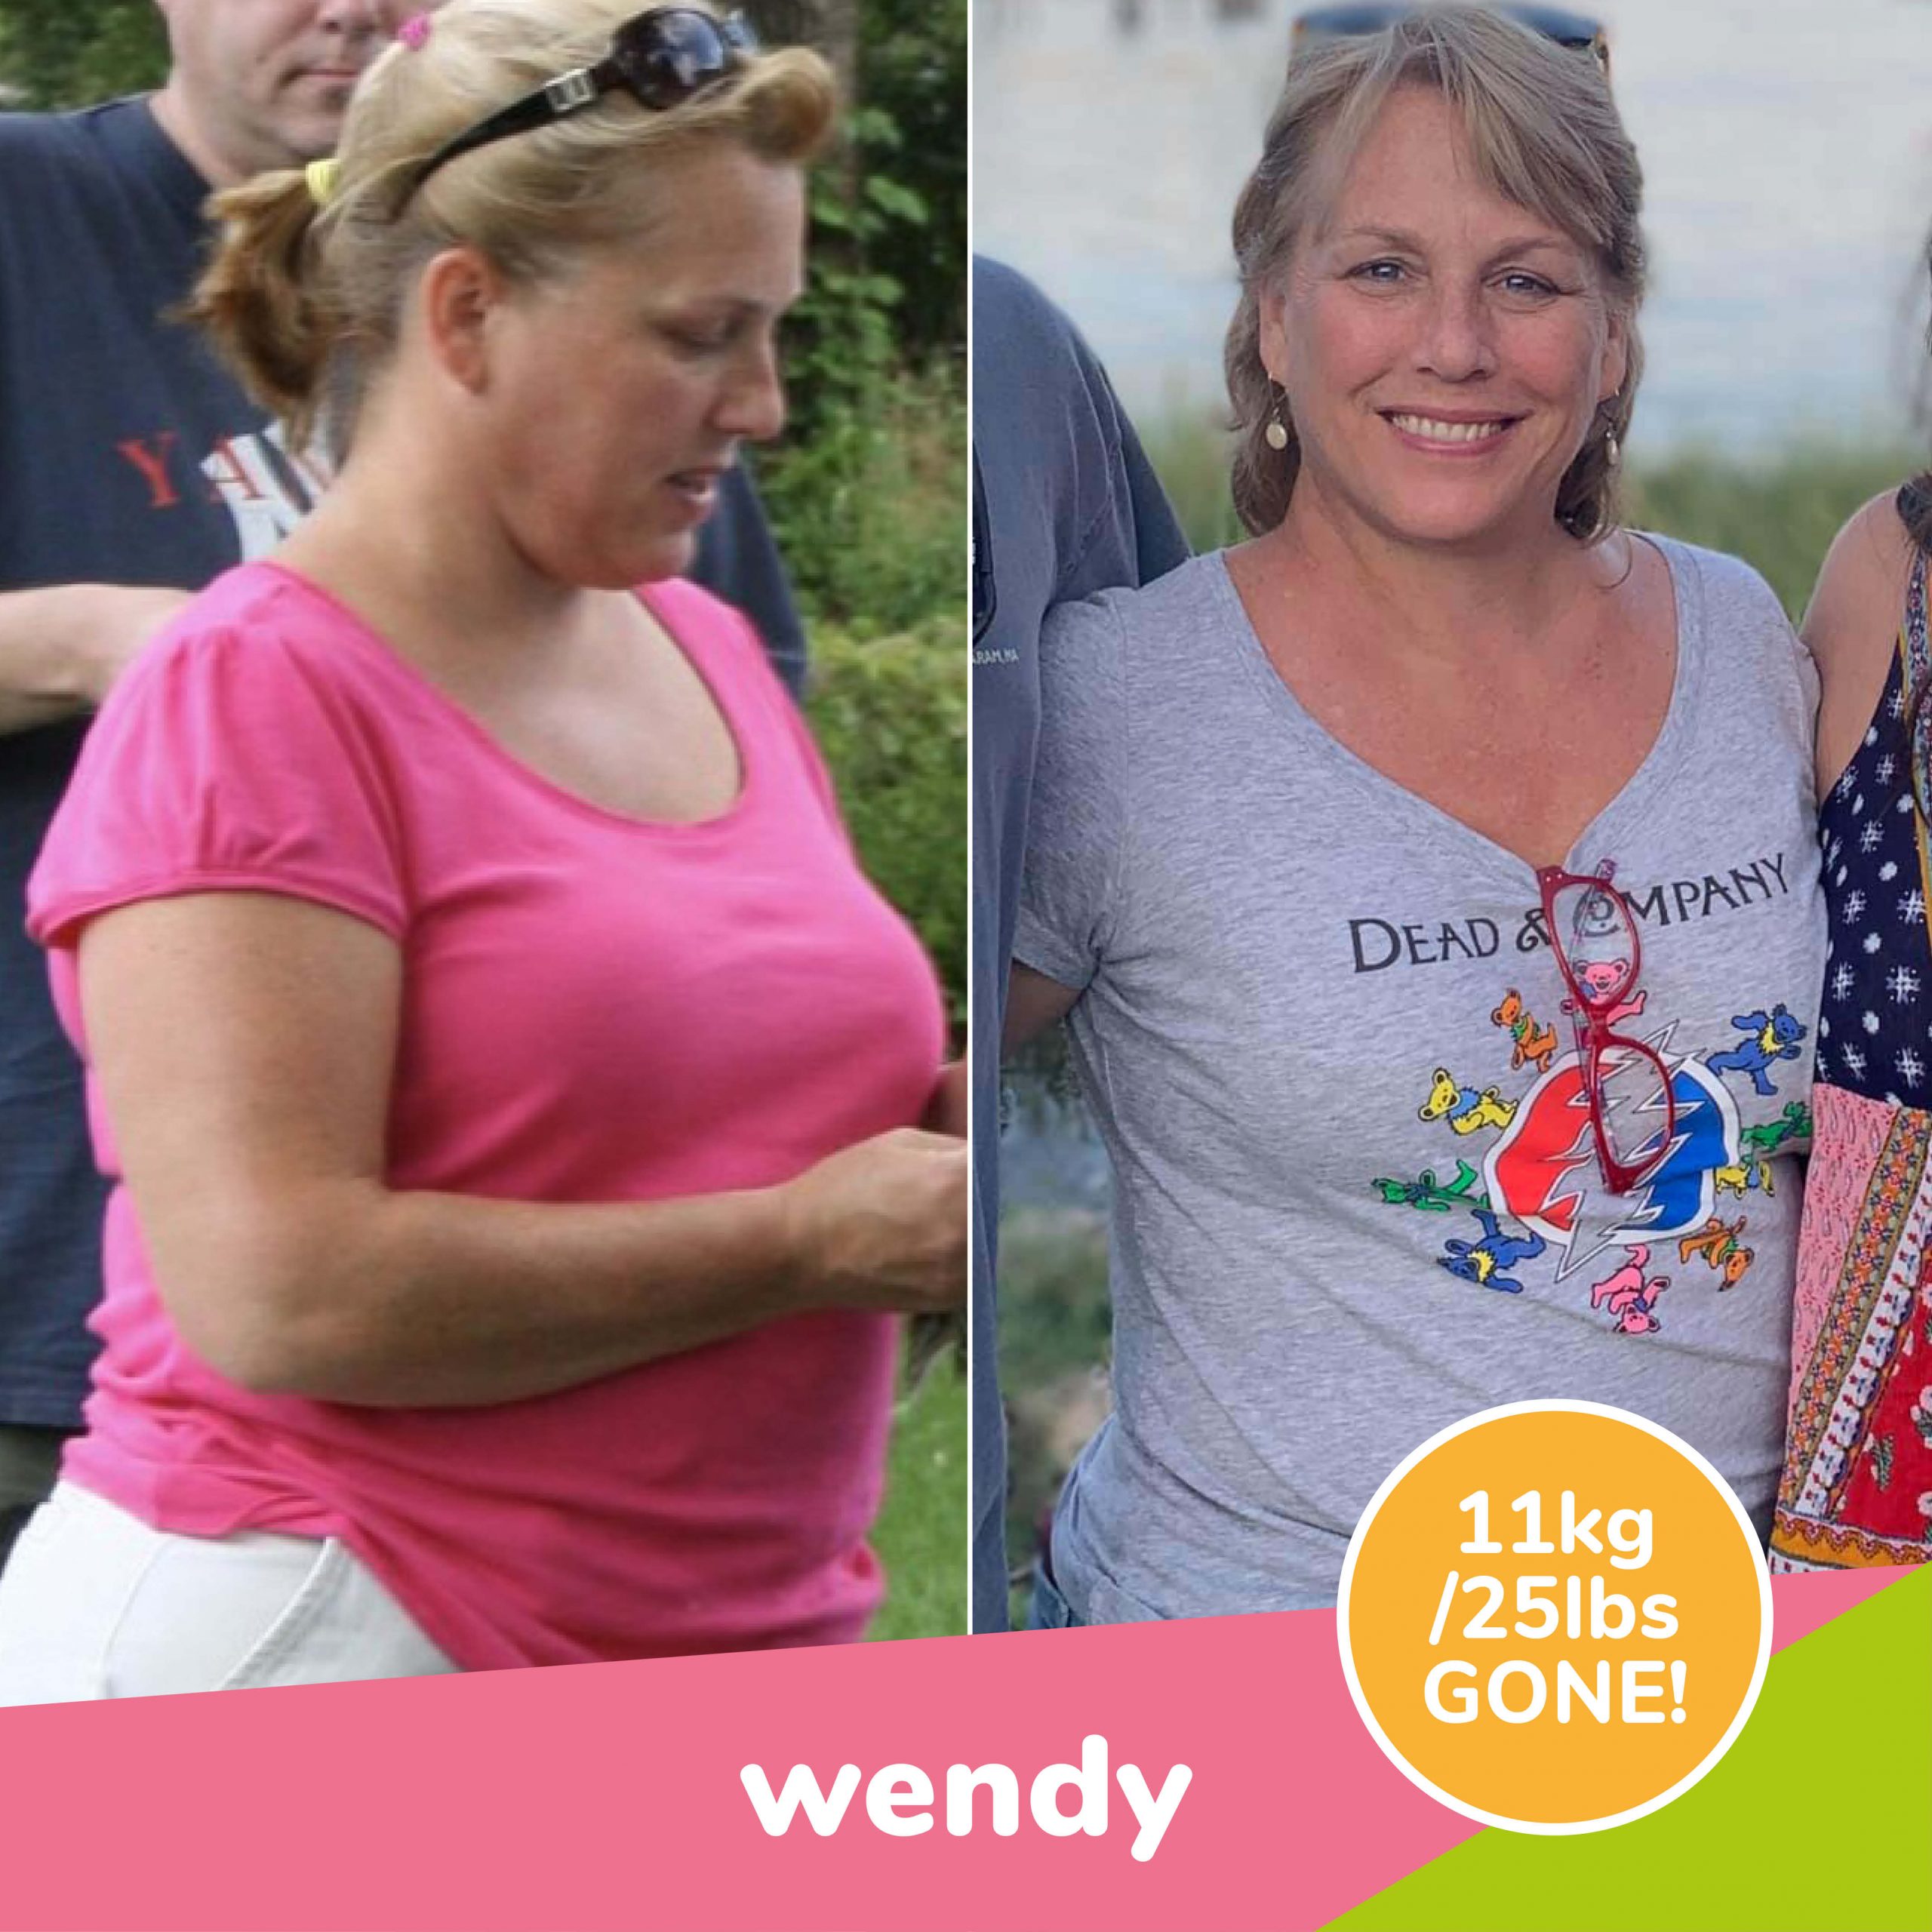 How would you like your own PERSONAL WEIGHT LOSS COACH? 1:1 COACHING $524 ~ SAVE $327!